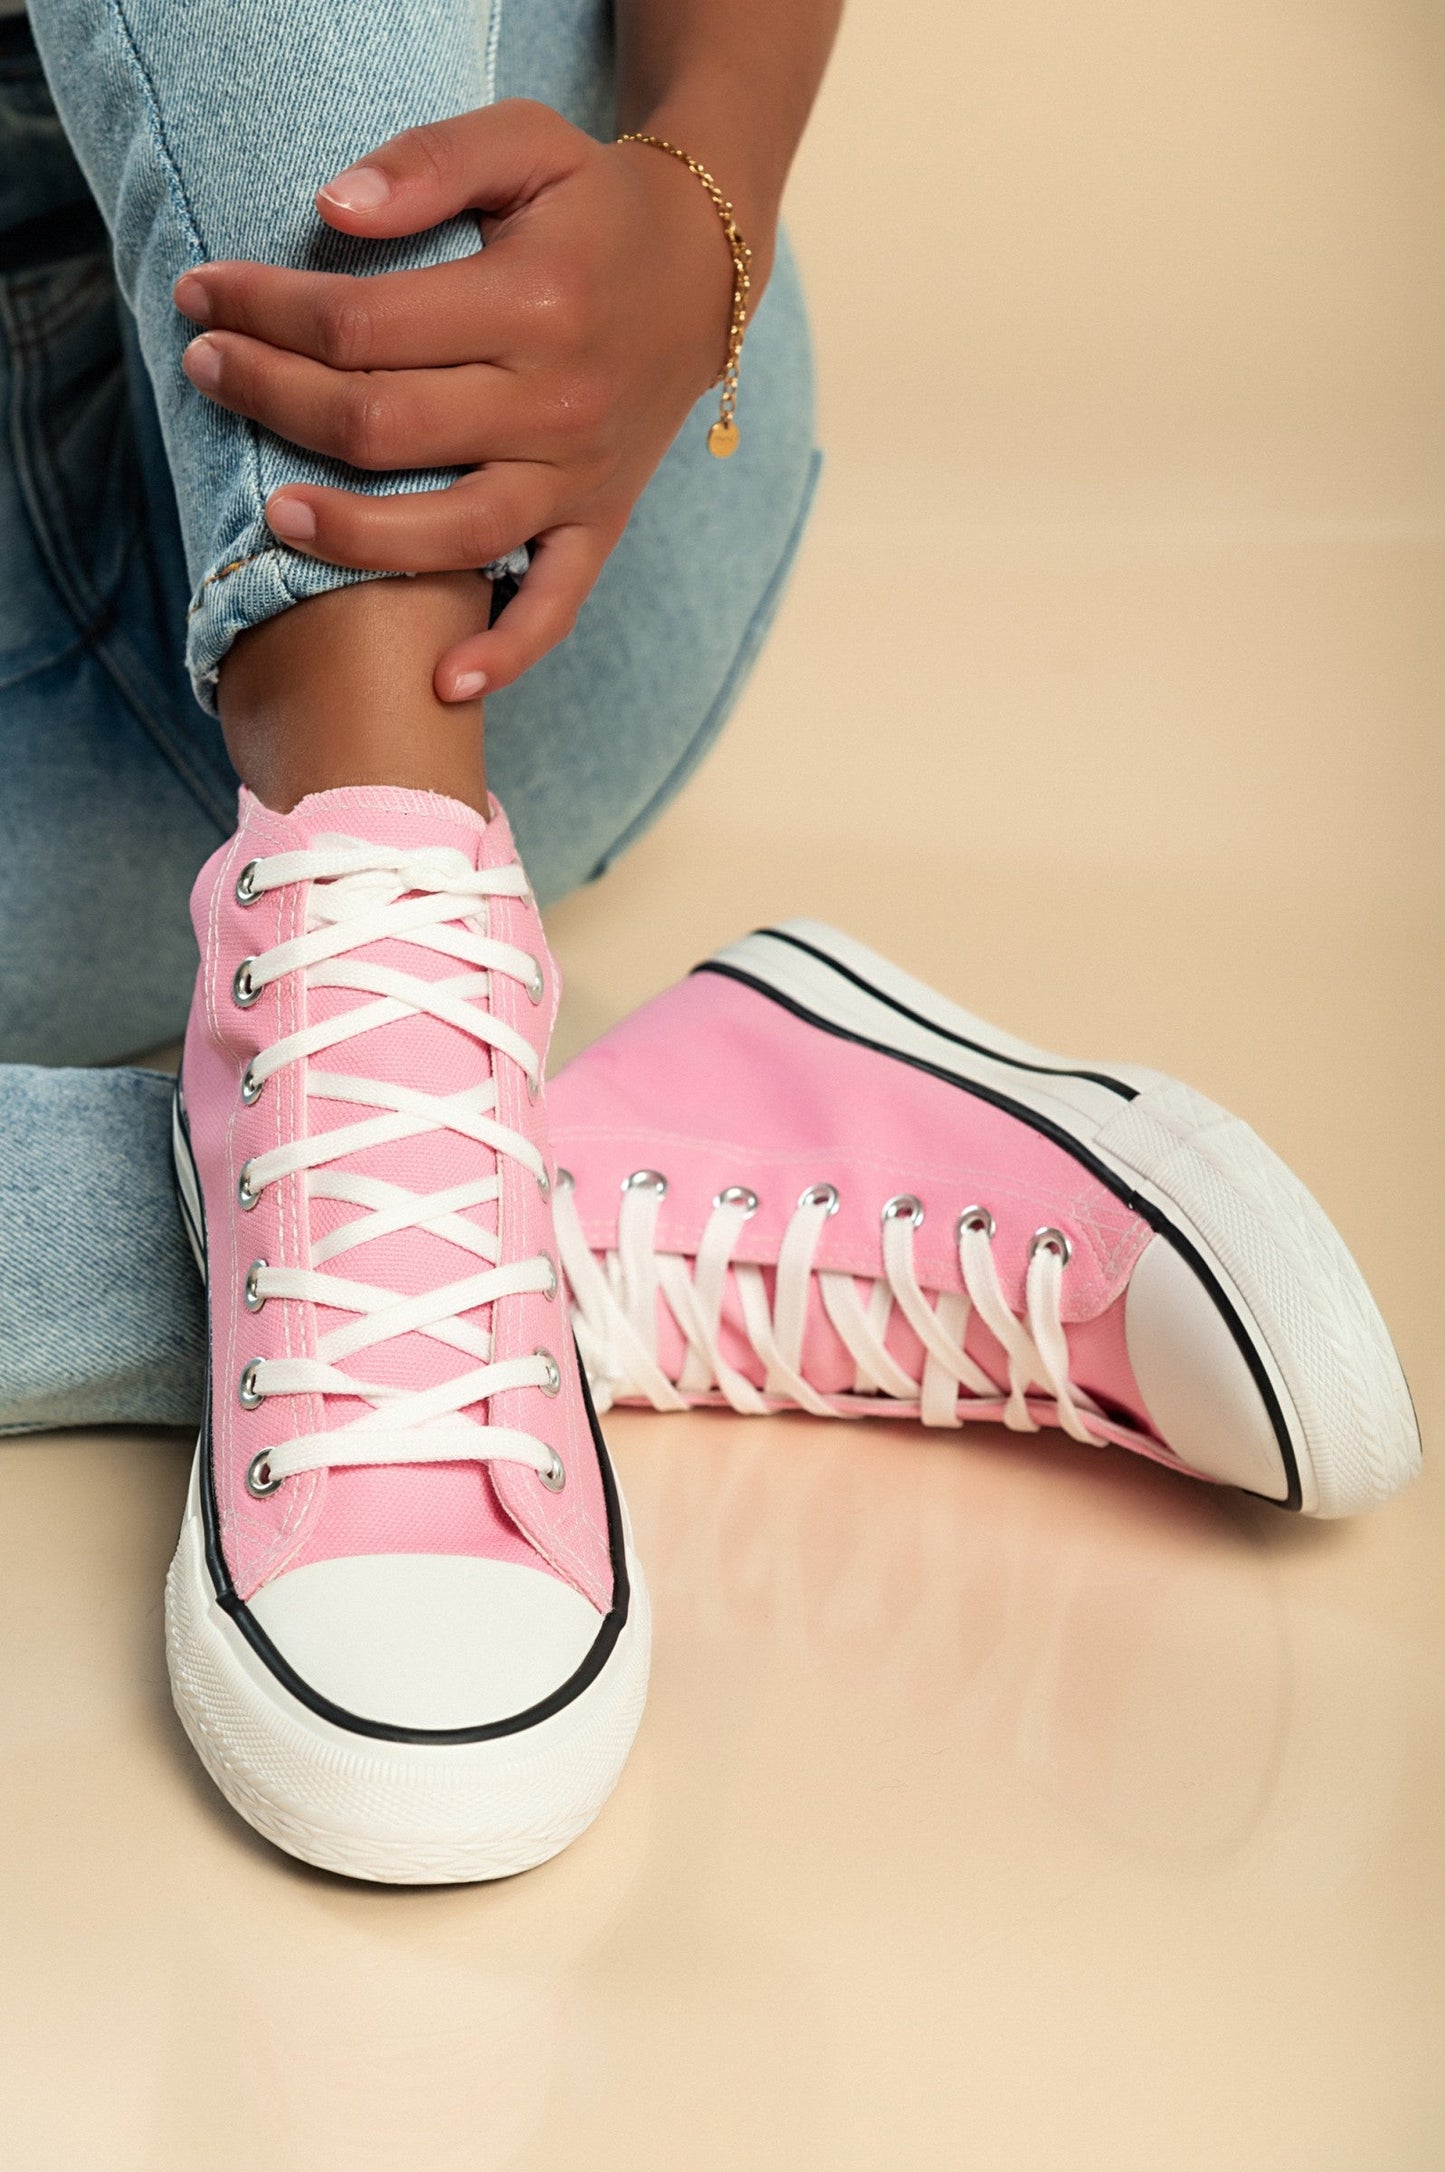 Fashionable High-Top Sneakers Made of Pink Fabric